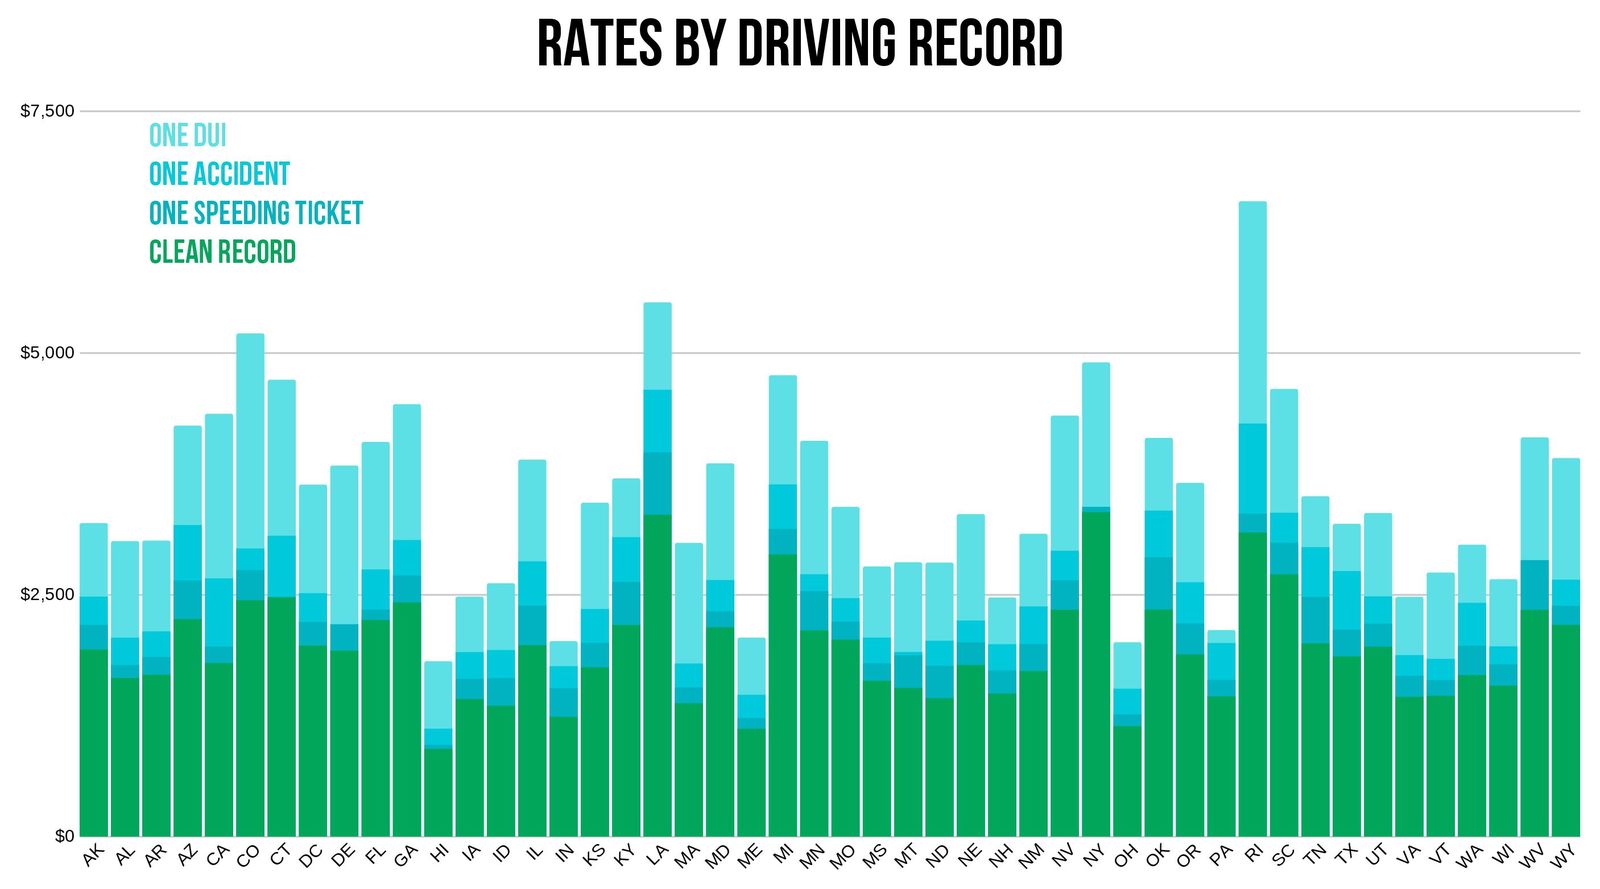 USAA rates depending on driving record